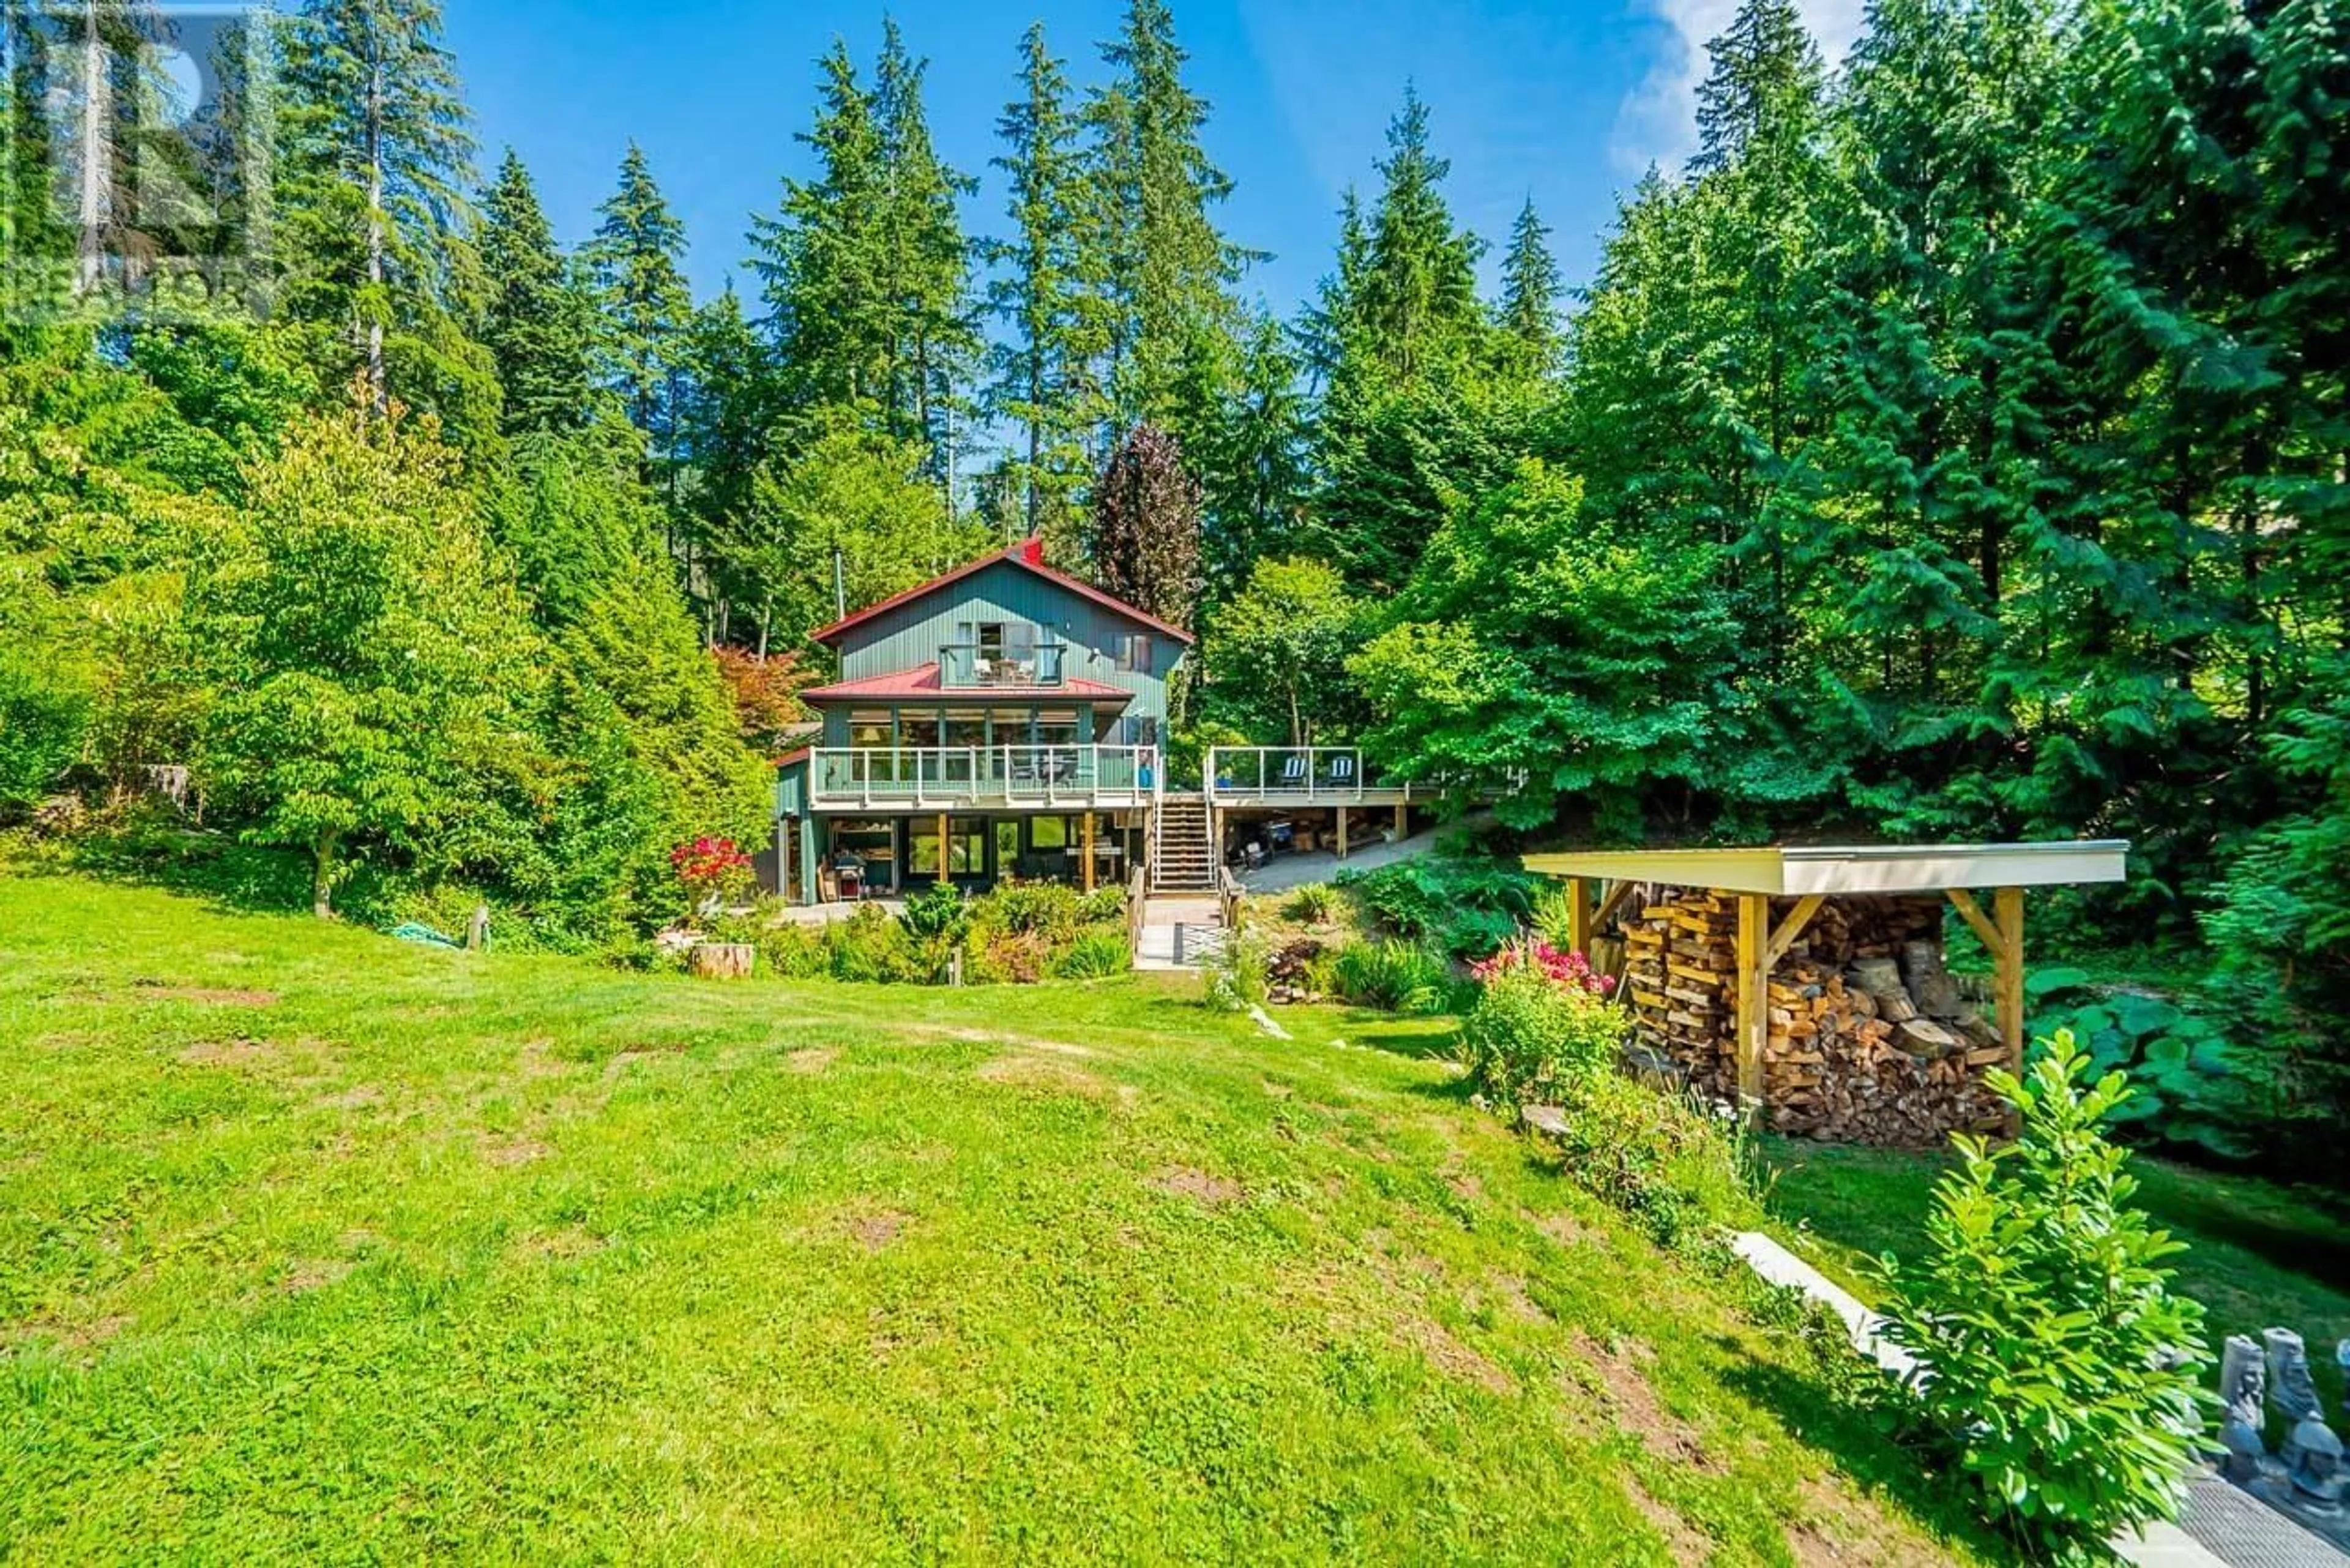 Cottage for 2250 FARRER COVE PLACE, Port Moody British Columbia V3H5B6